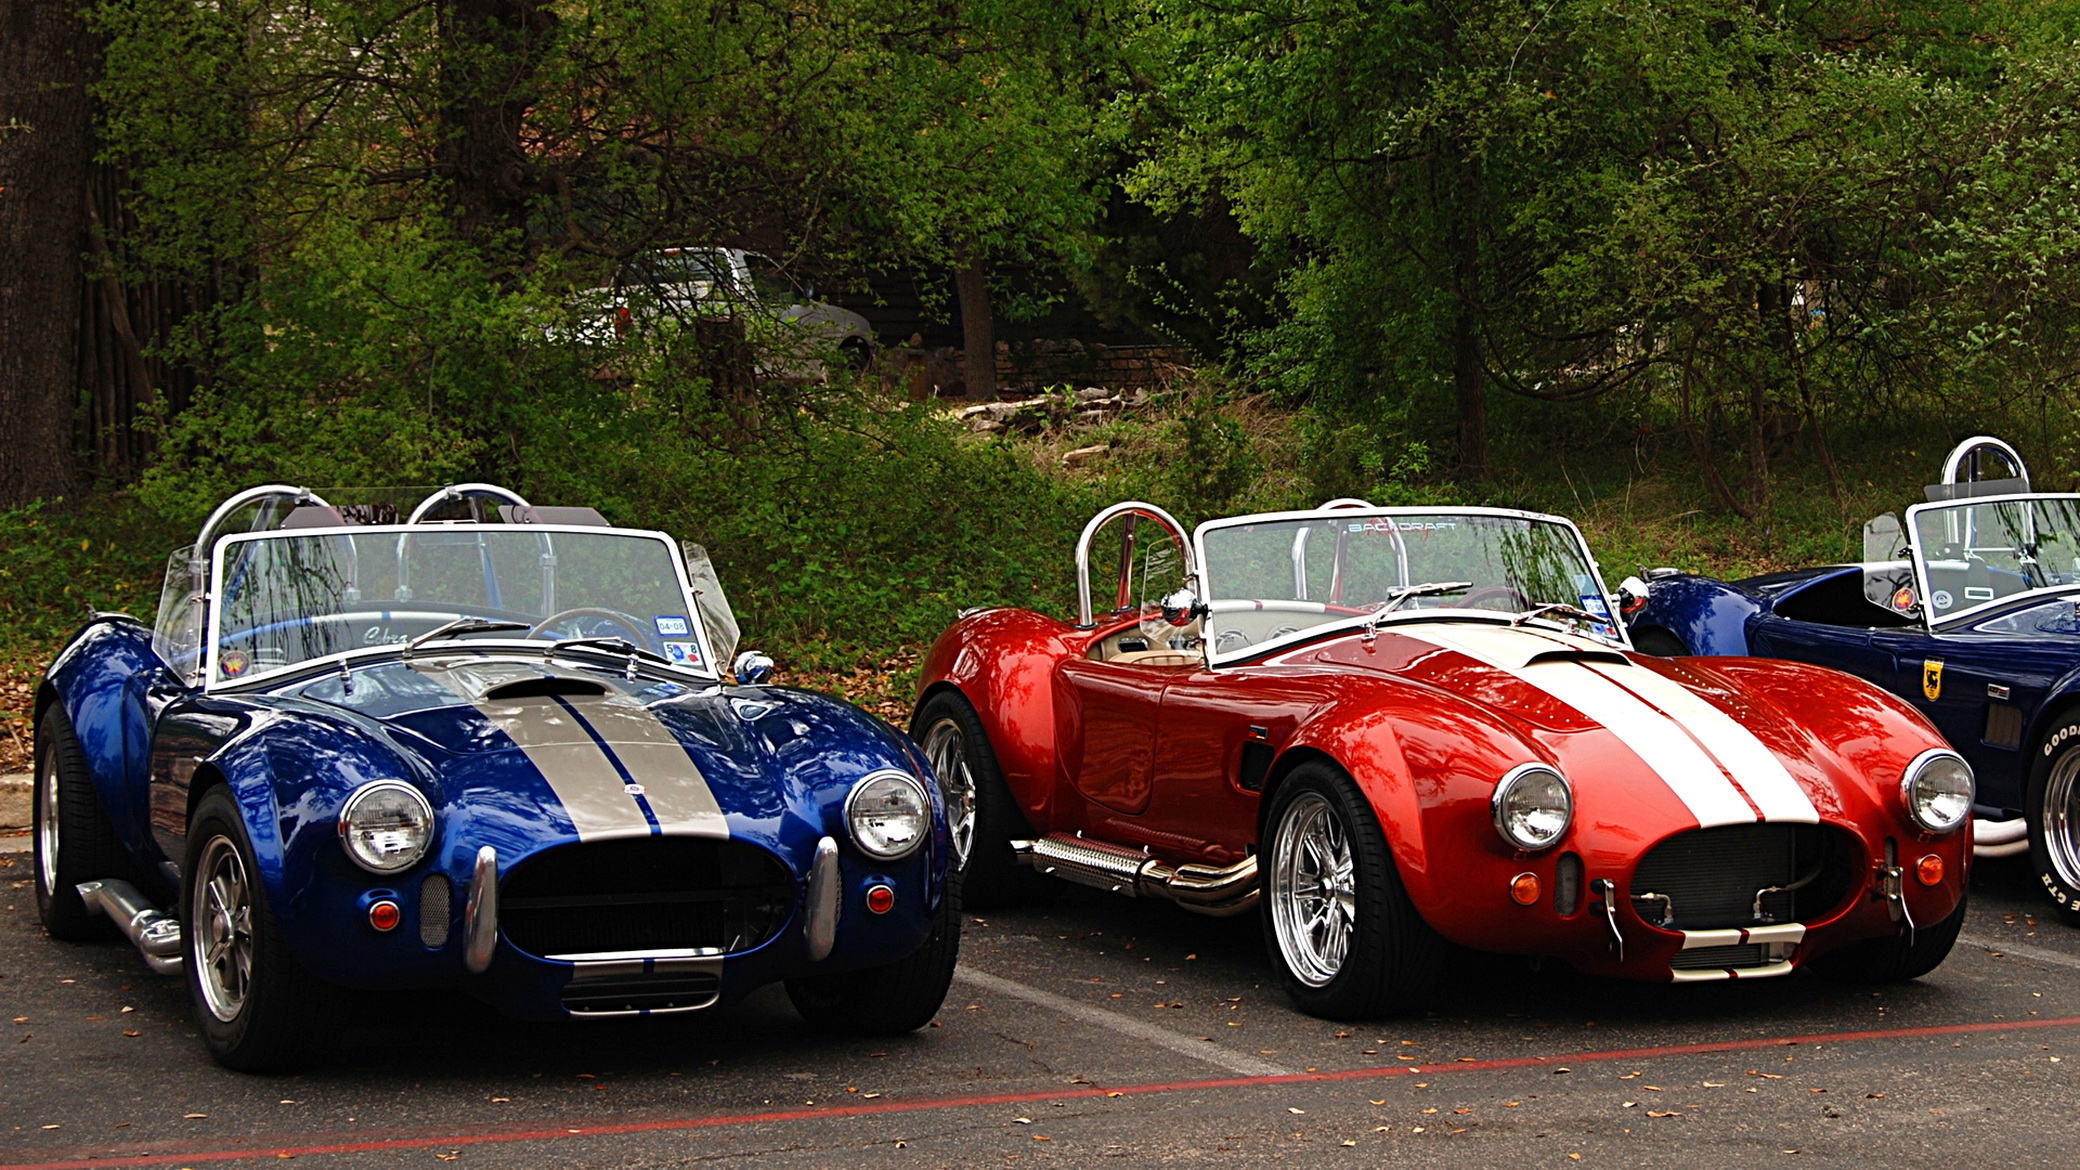 shelby, Super, Cobra, Hot, Rod, Muscle, Cars Wallpaper